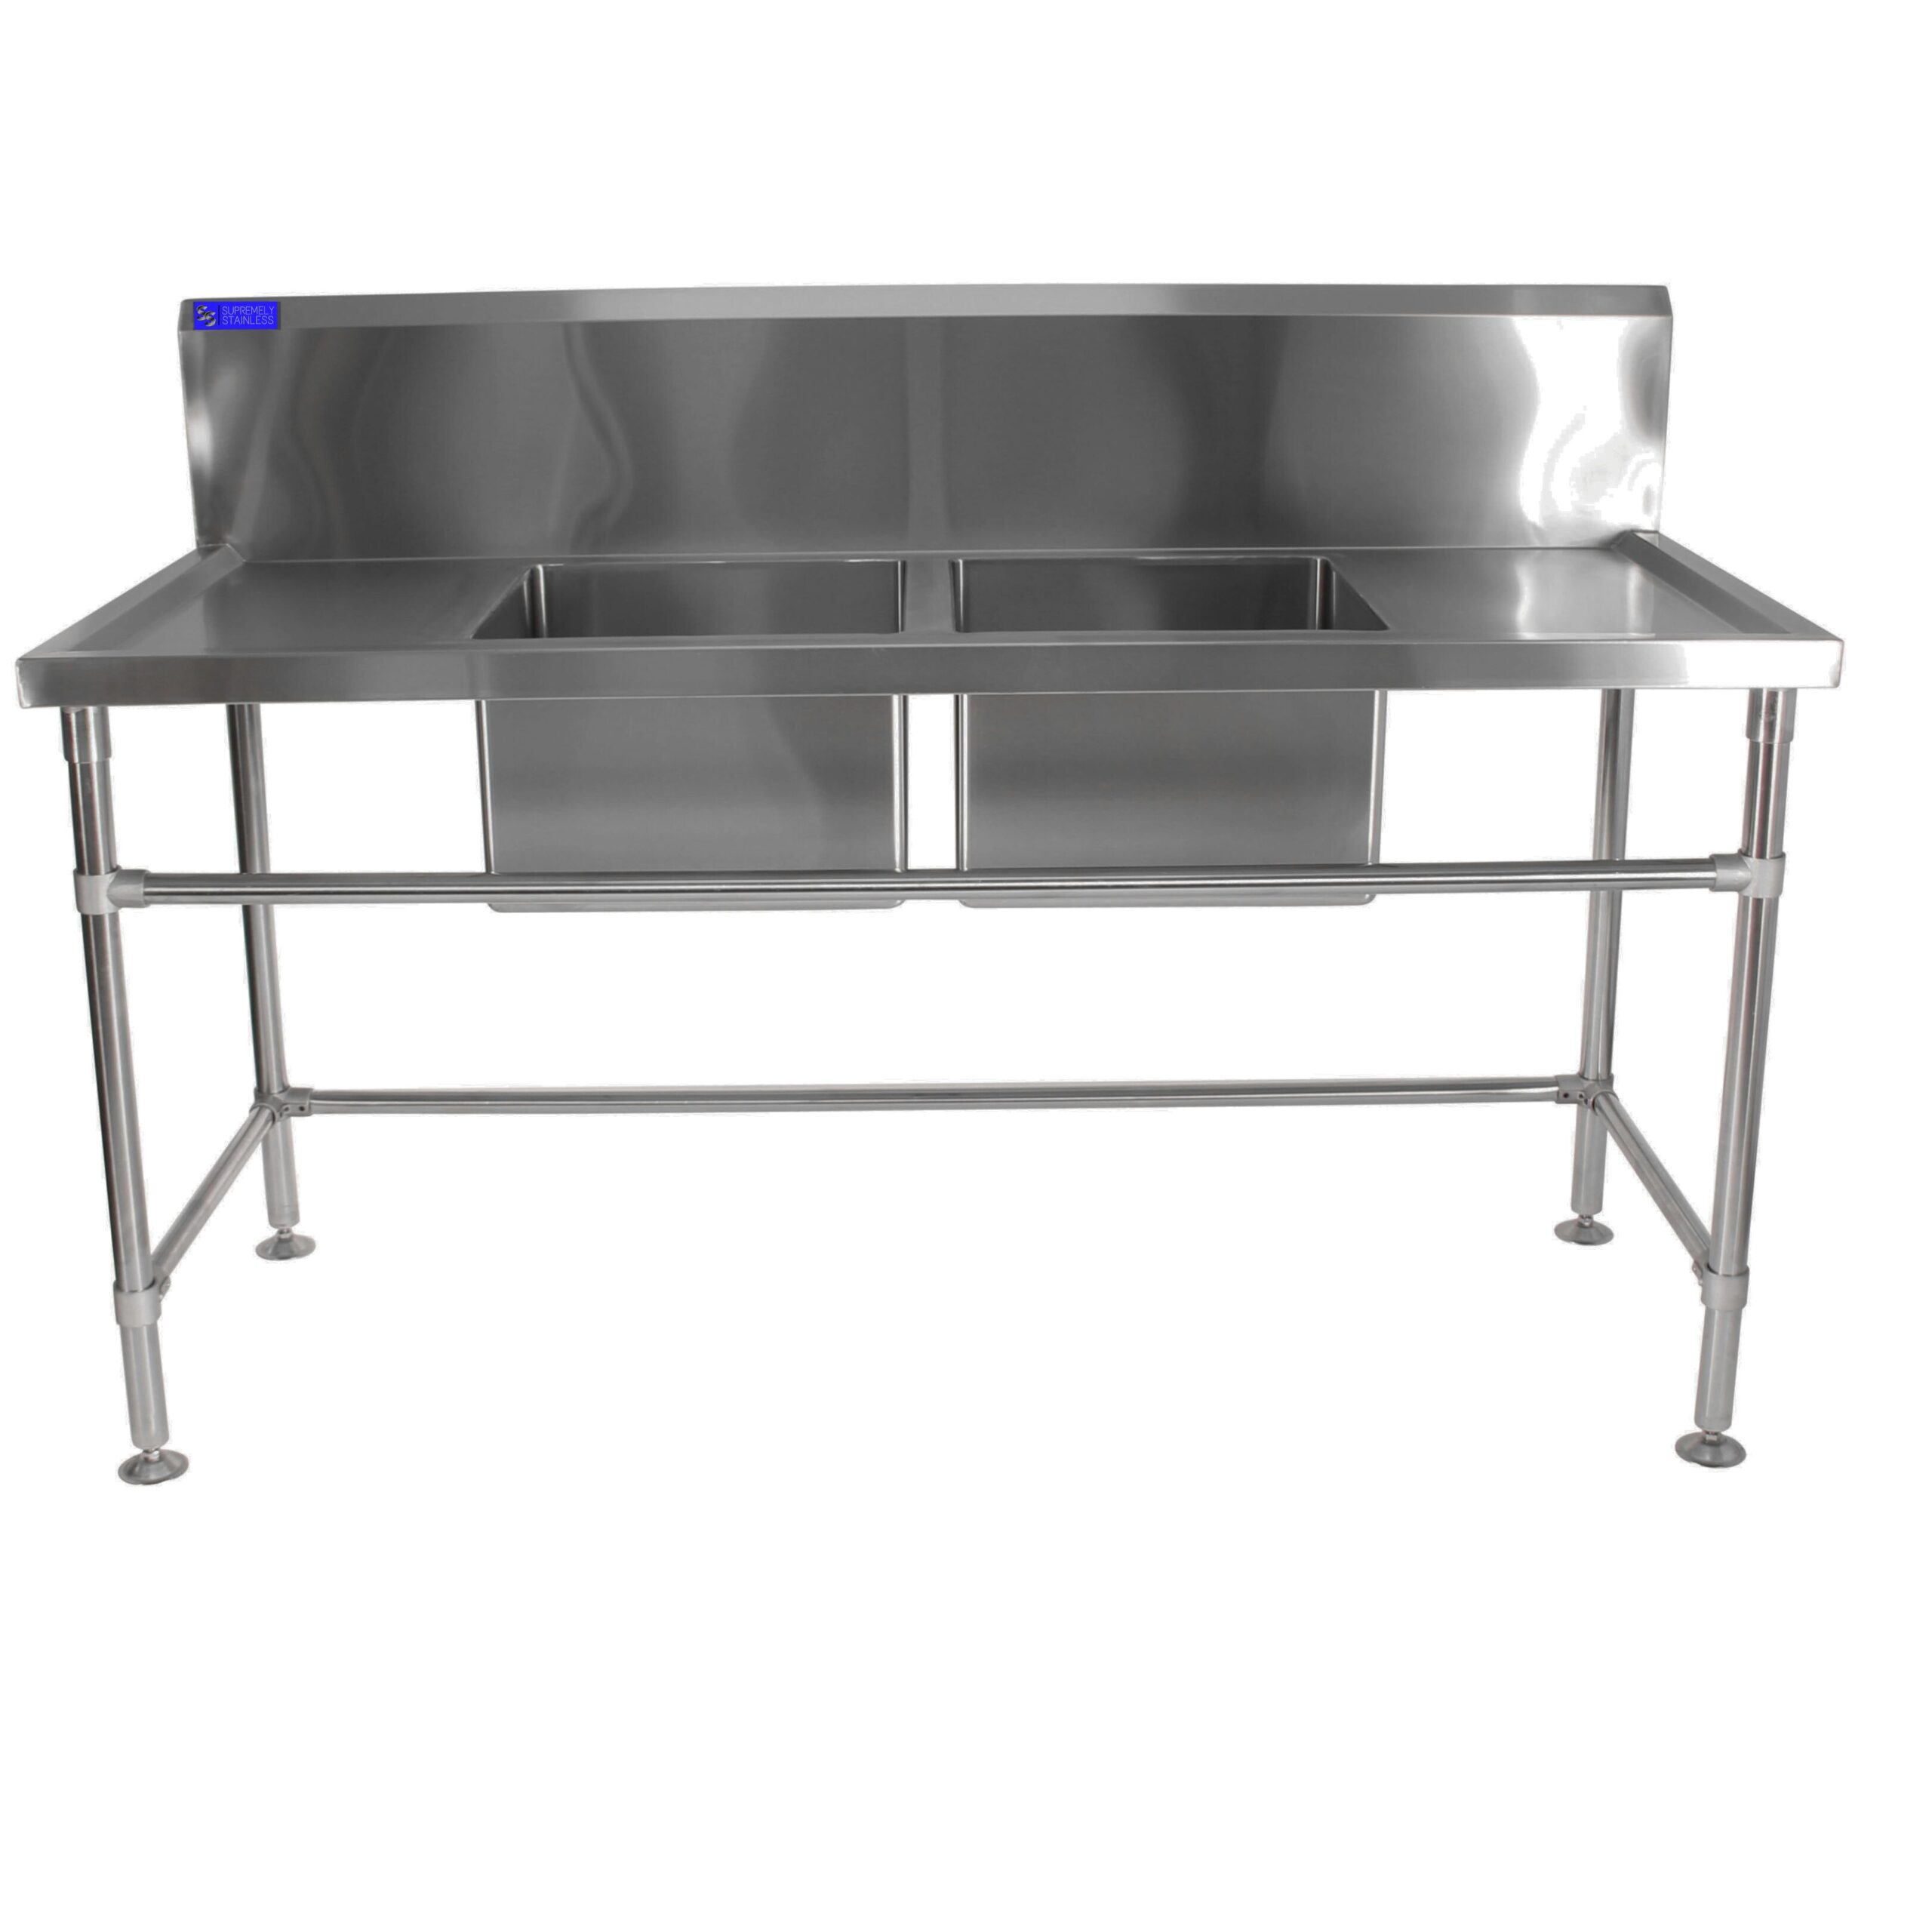 Stainless Steel Sink 700mm x 1800mm Double Bowl